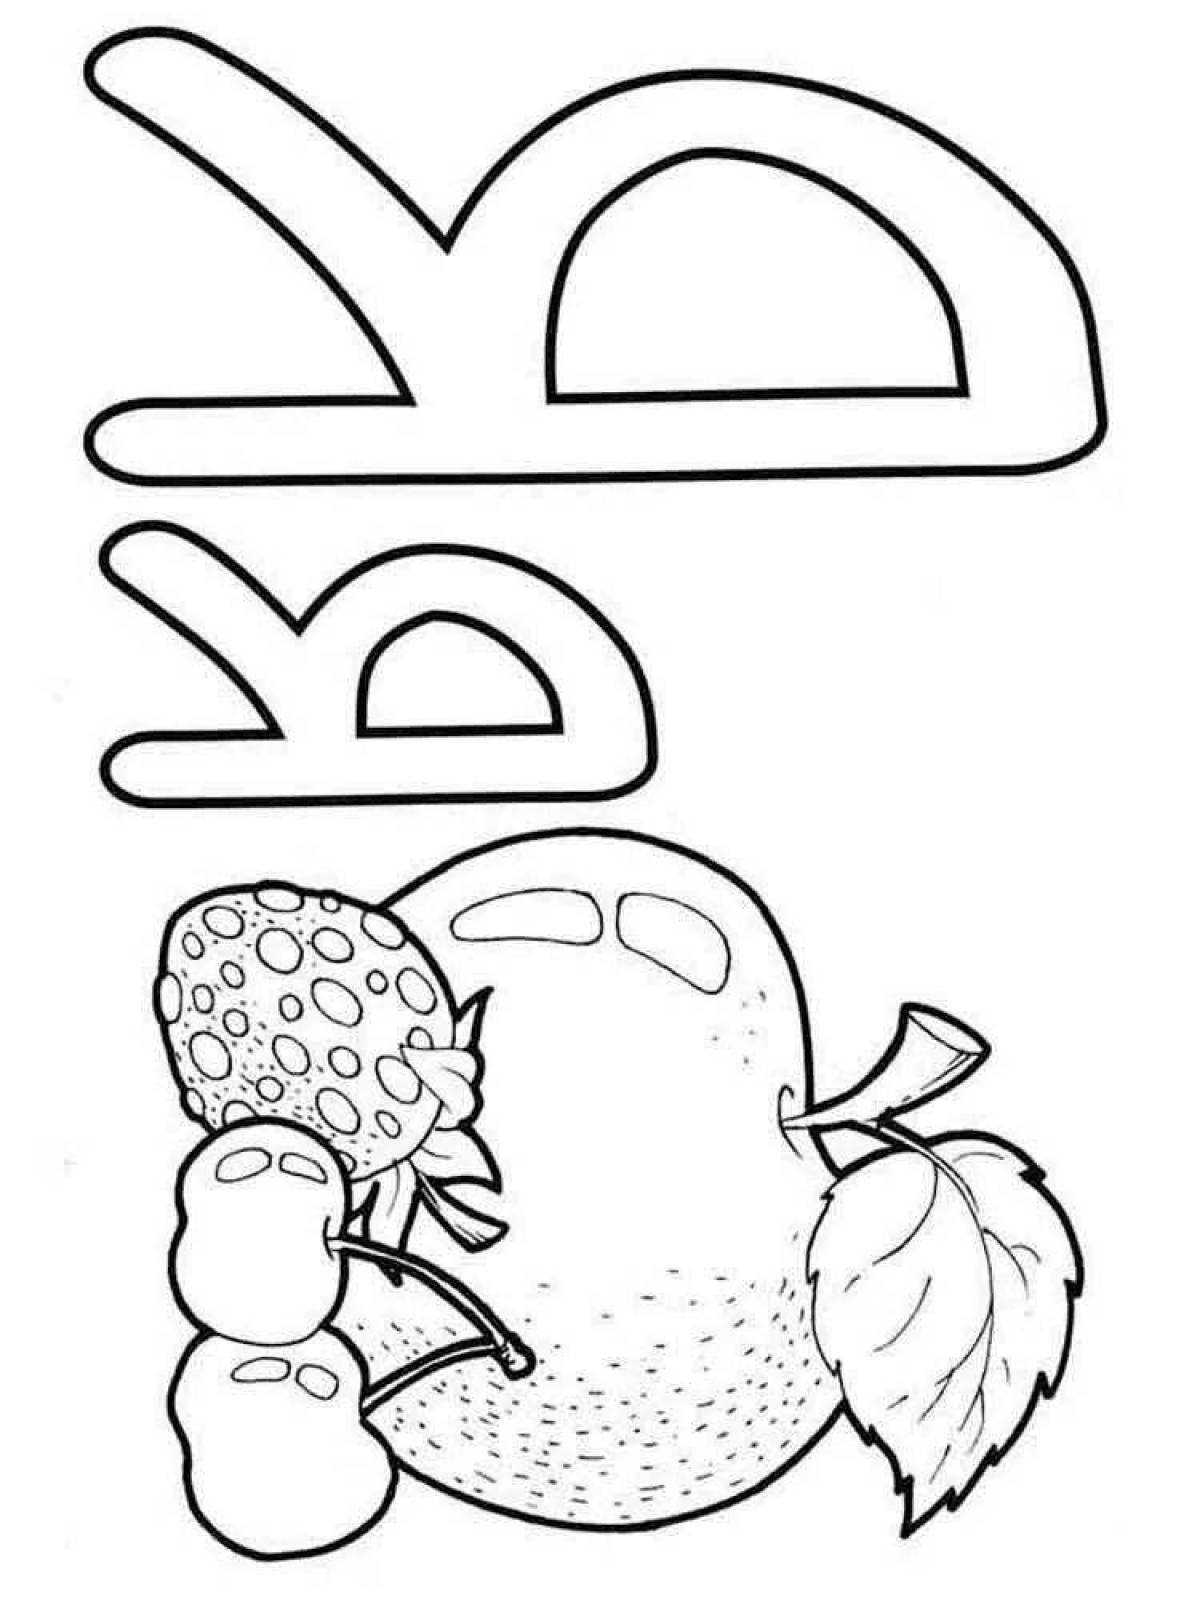 Adorable letter coloring book for 4-5 year olds